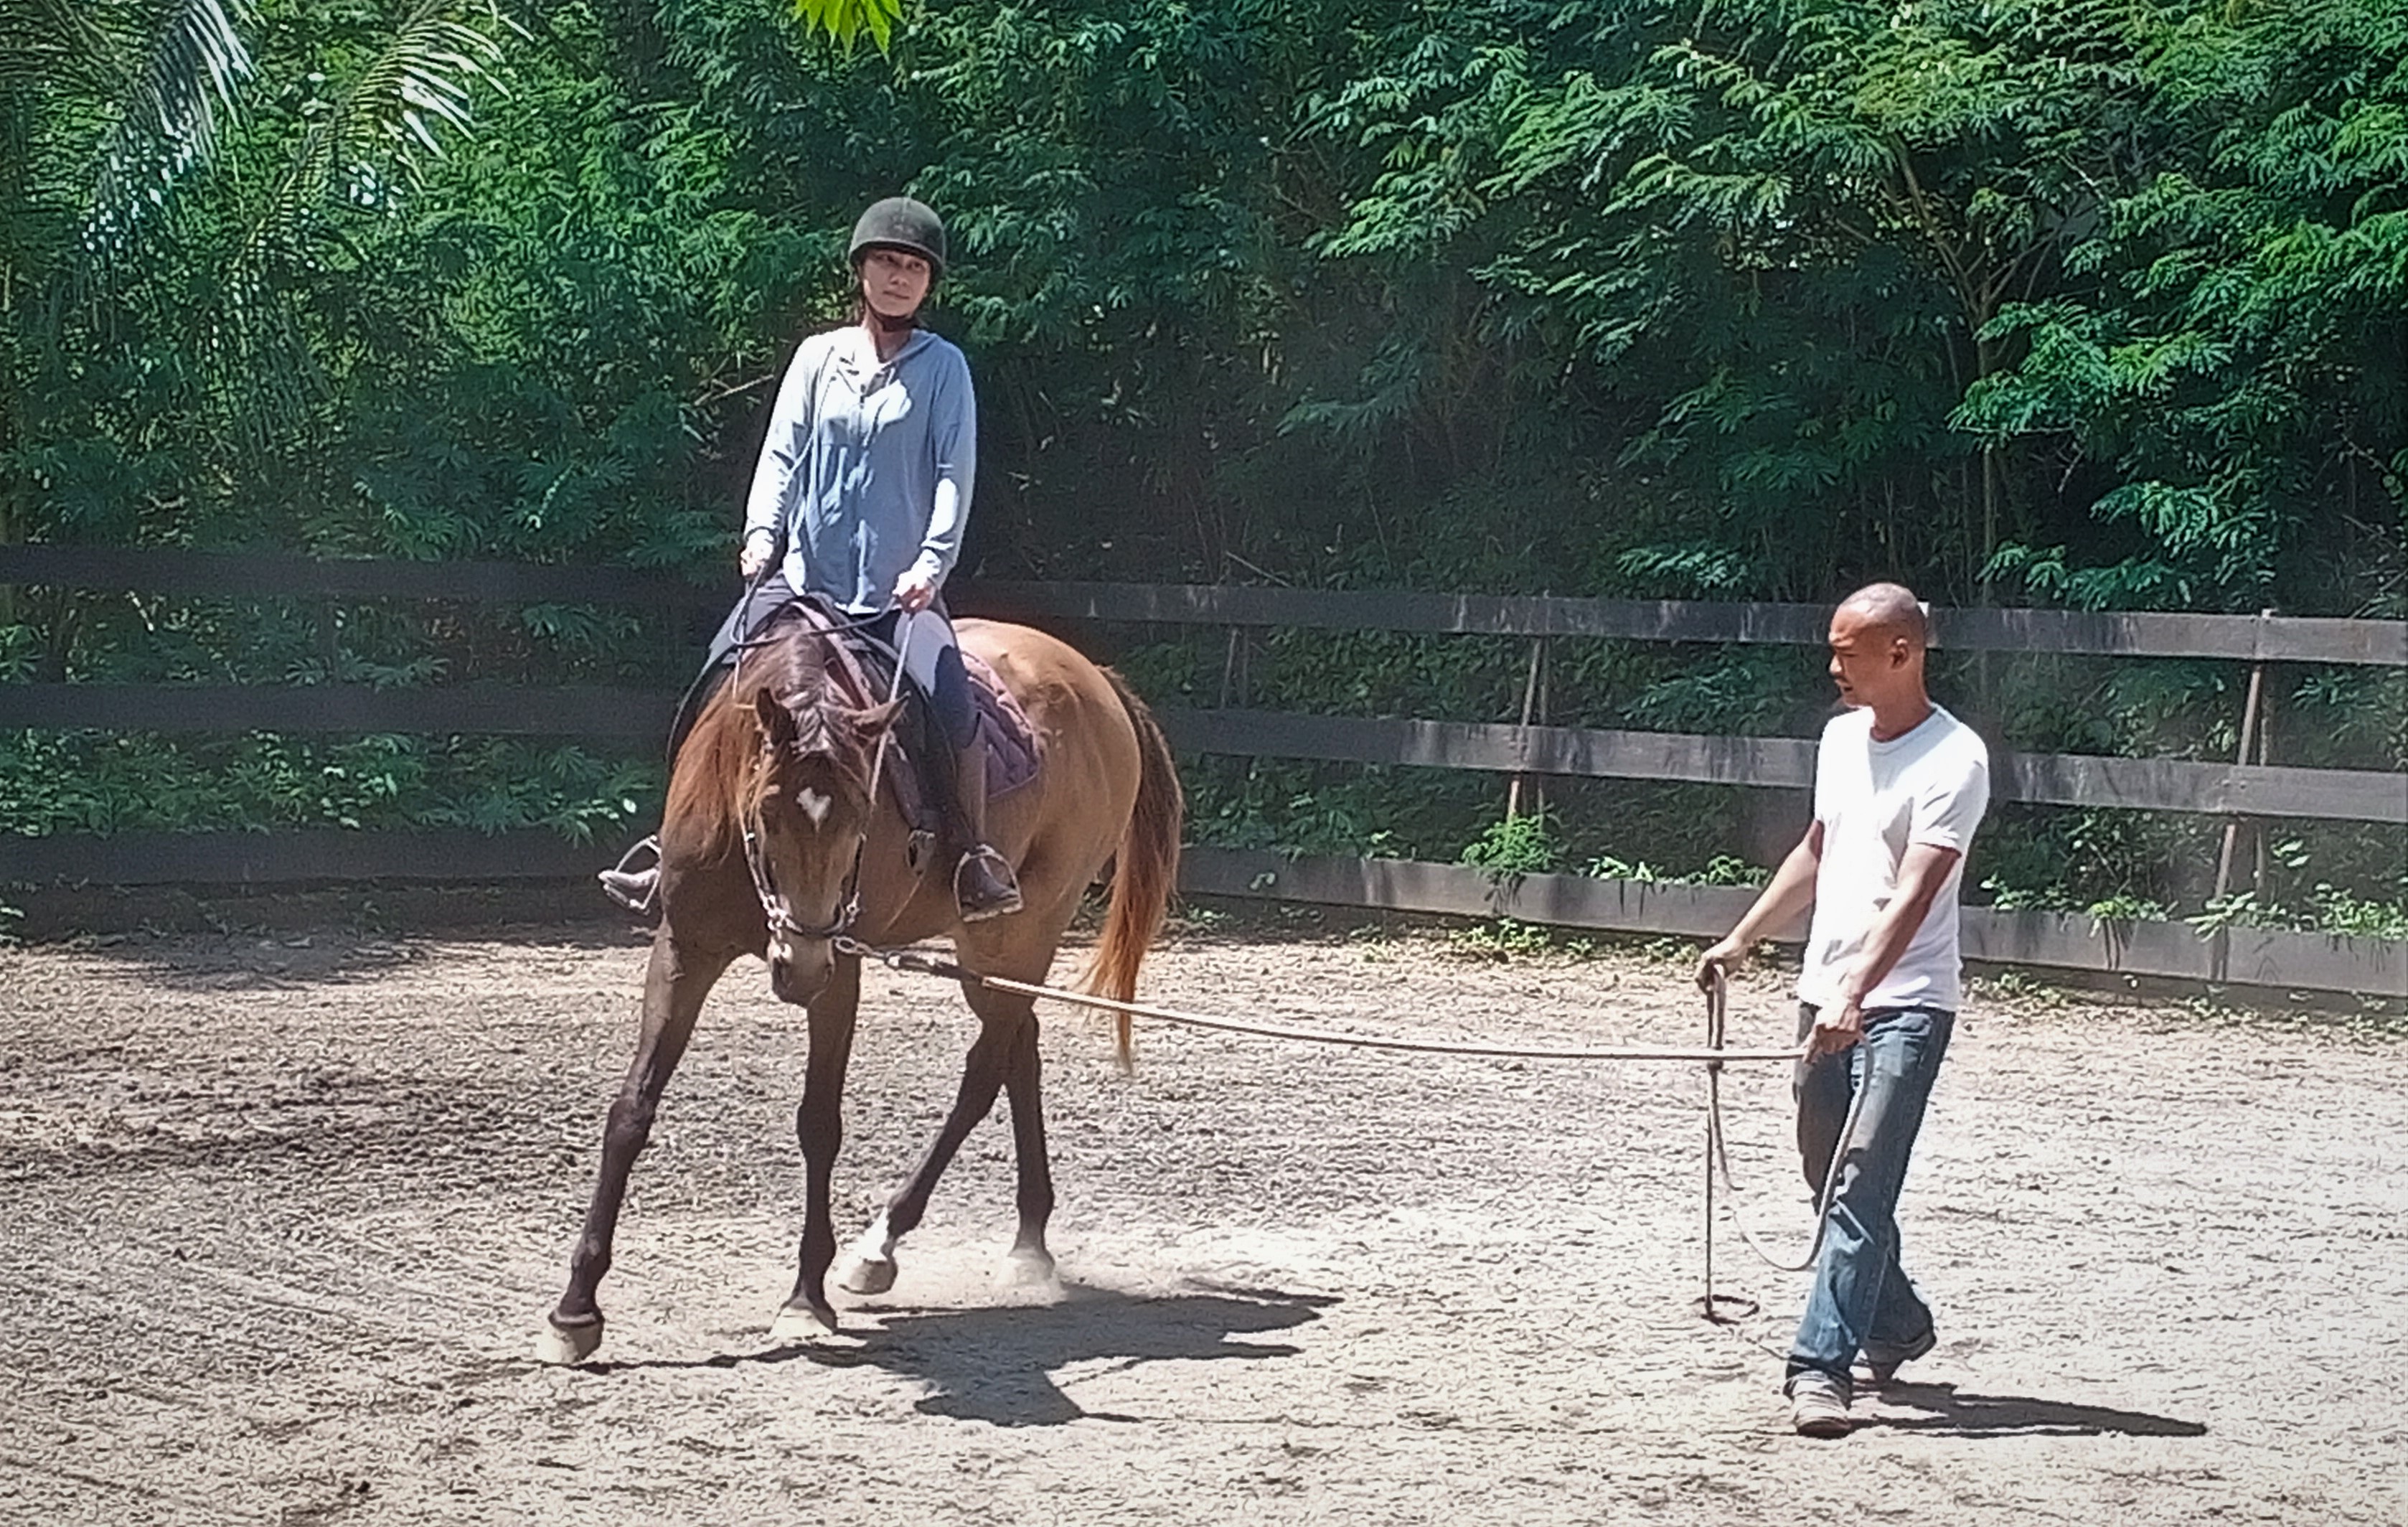 Riding with LFS: lateral bend, forward down tendency, and stepping under with the inside hind leg